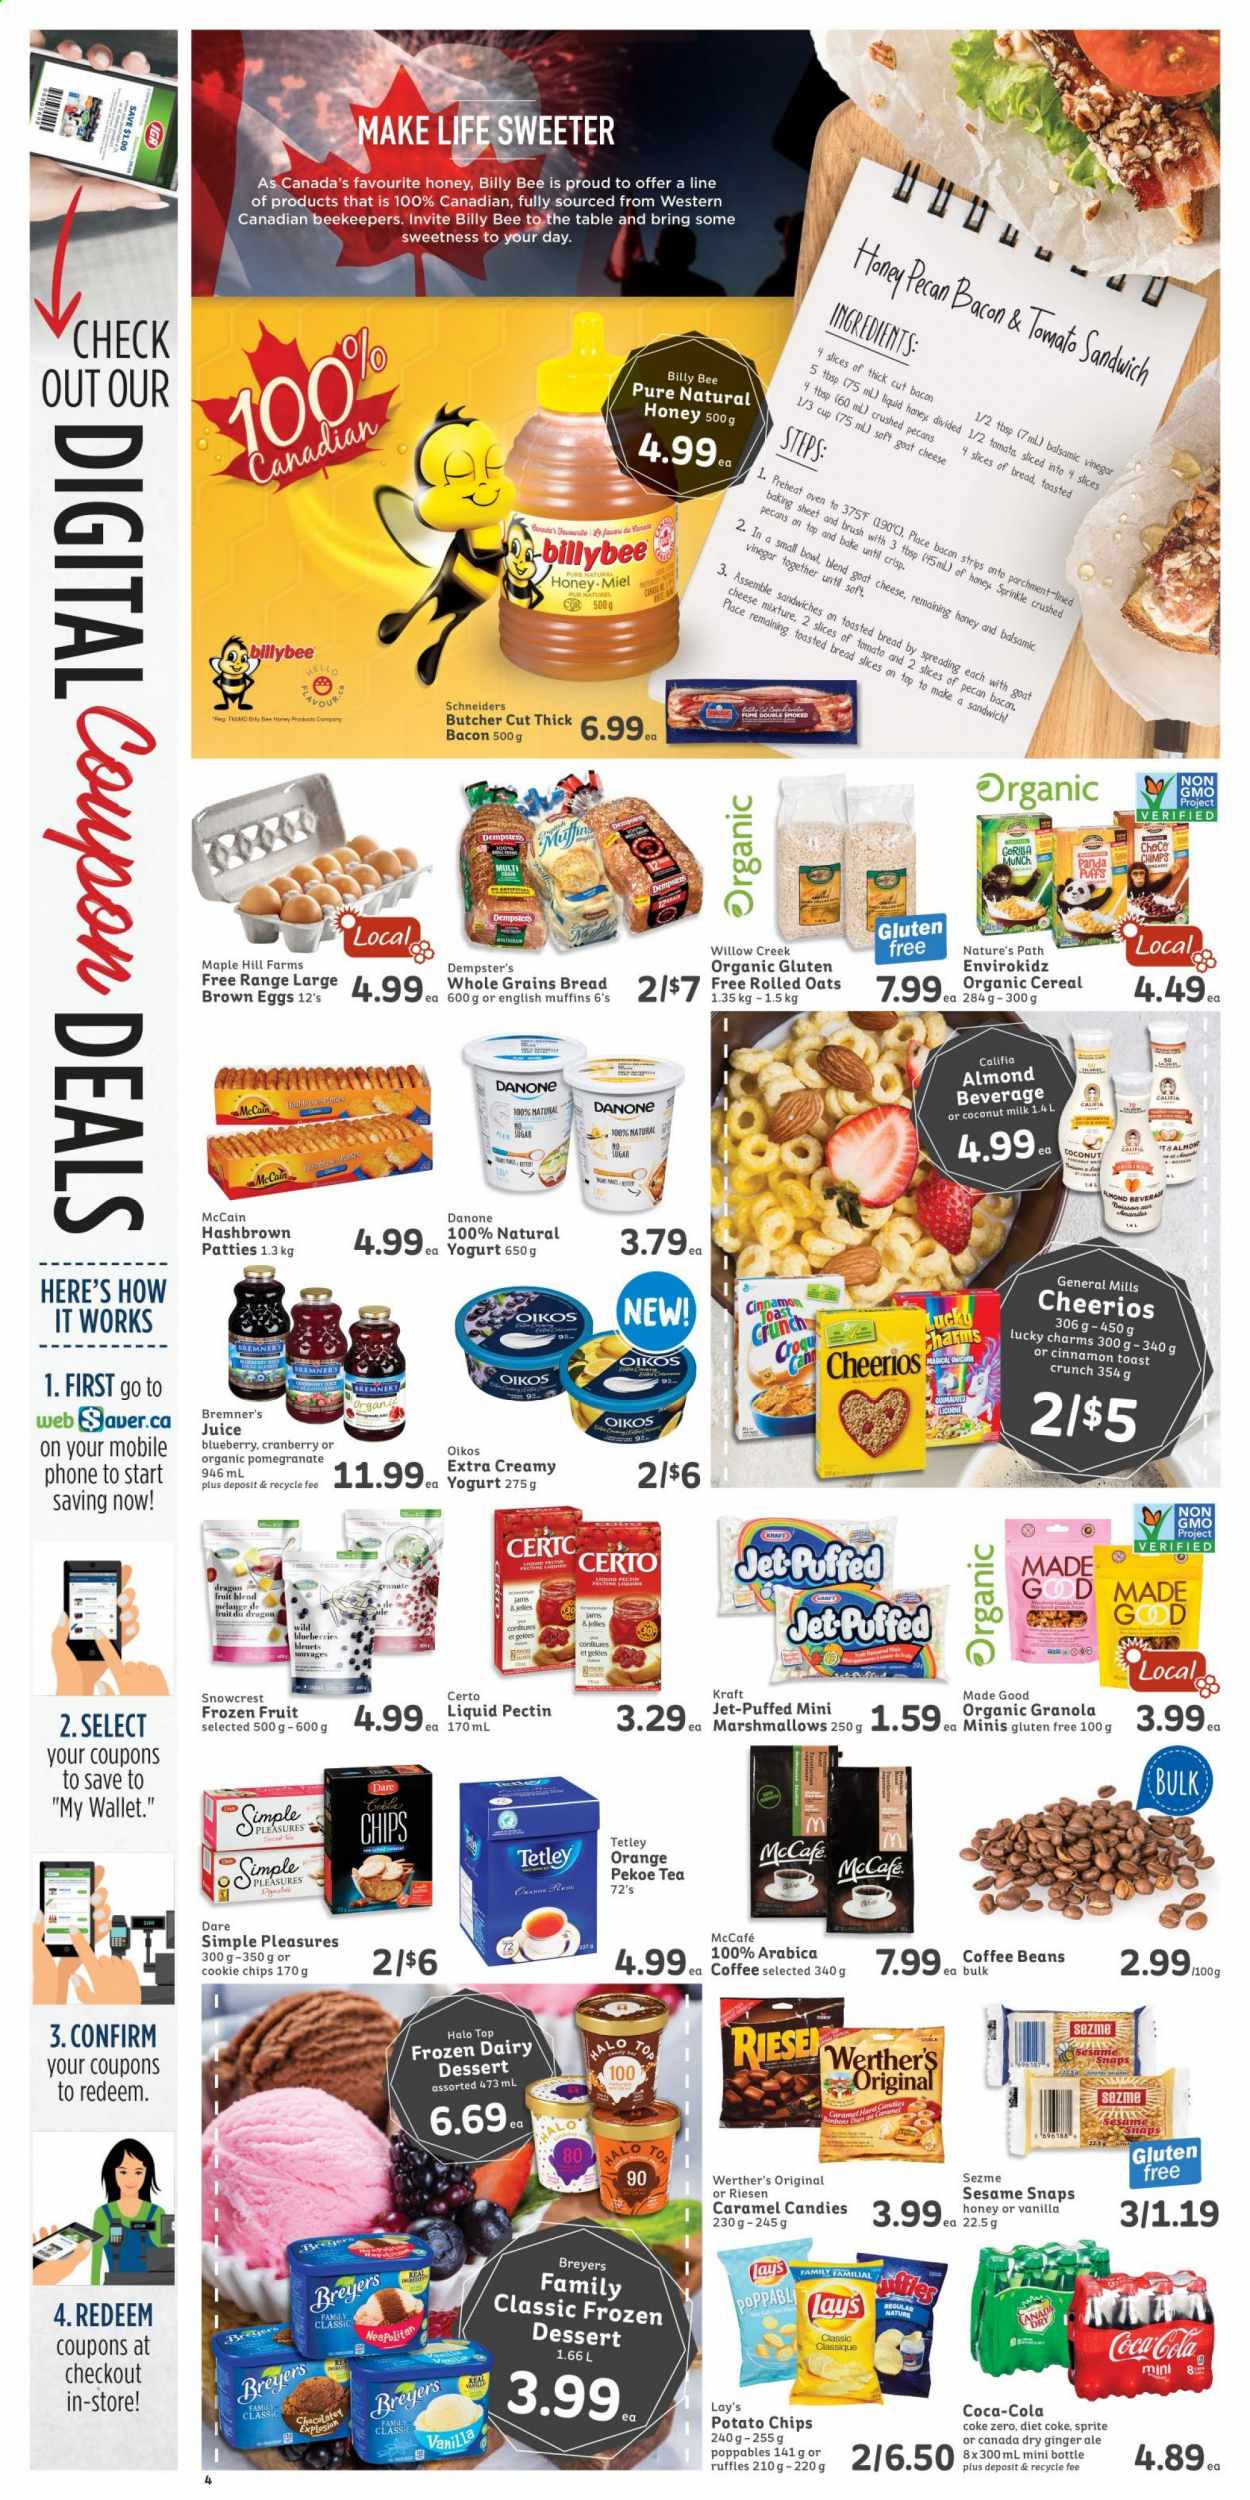 thumbnail - IGA Simple Goodness Flyer - September 06, 2021 - September 12, 2021 - Sales products - english muffins, tostadas, puffs, dessert, pomegranate, sandwich, Kraft®, yoghurt, Oikos, almond milk, eggs, frozen dessert, frozen fruit, McCain, hash browns, cookies, marshmallows, Werther's Original, General Mills, sweets, potato chips, Lay’s, Ruffles, salty snack, oats, coconut milk, granola, rolled oats, Cheerios, caramel, balsamic vinegar, pecans, Canada Dry, Coca-Cola, ginger ale, Sprite, juice, Diet Coke, soft drink, Coca-Cola zero, Coke, carbonated soft drink, tea, coffee, coffee beans, McCafe, Danone. Page 4.